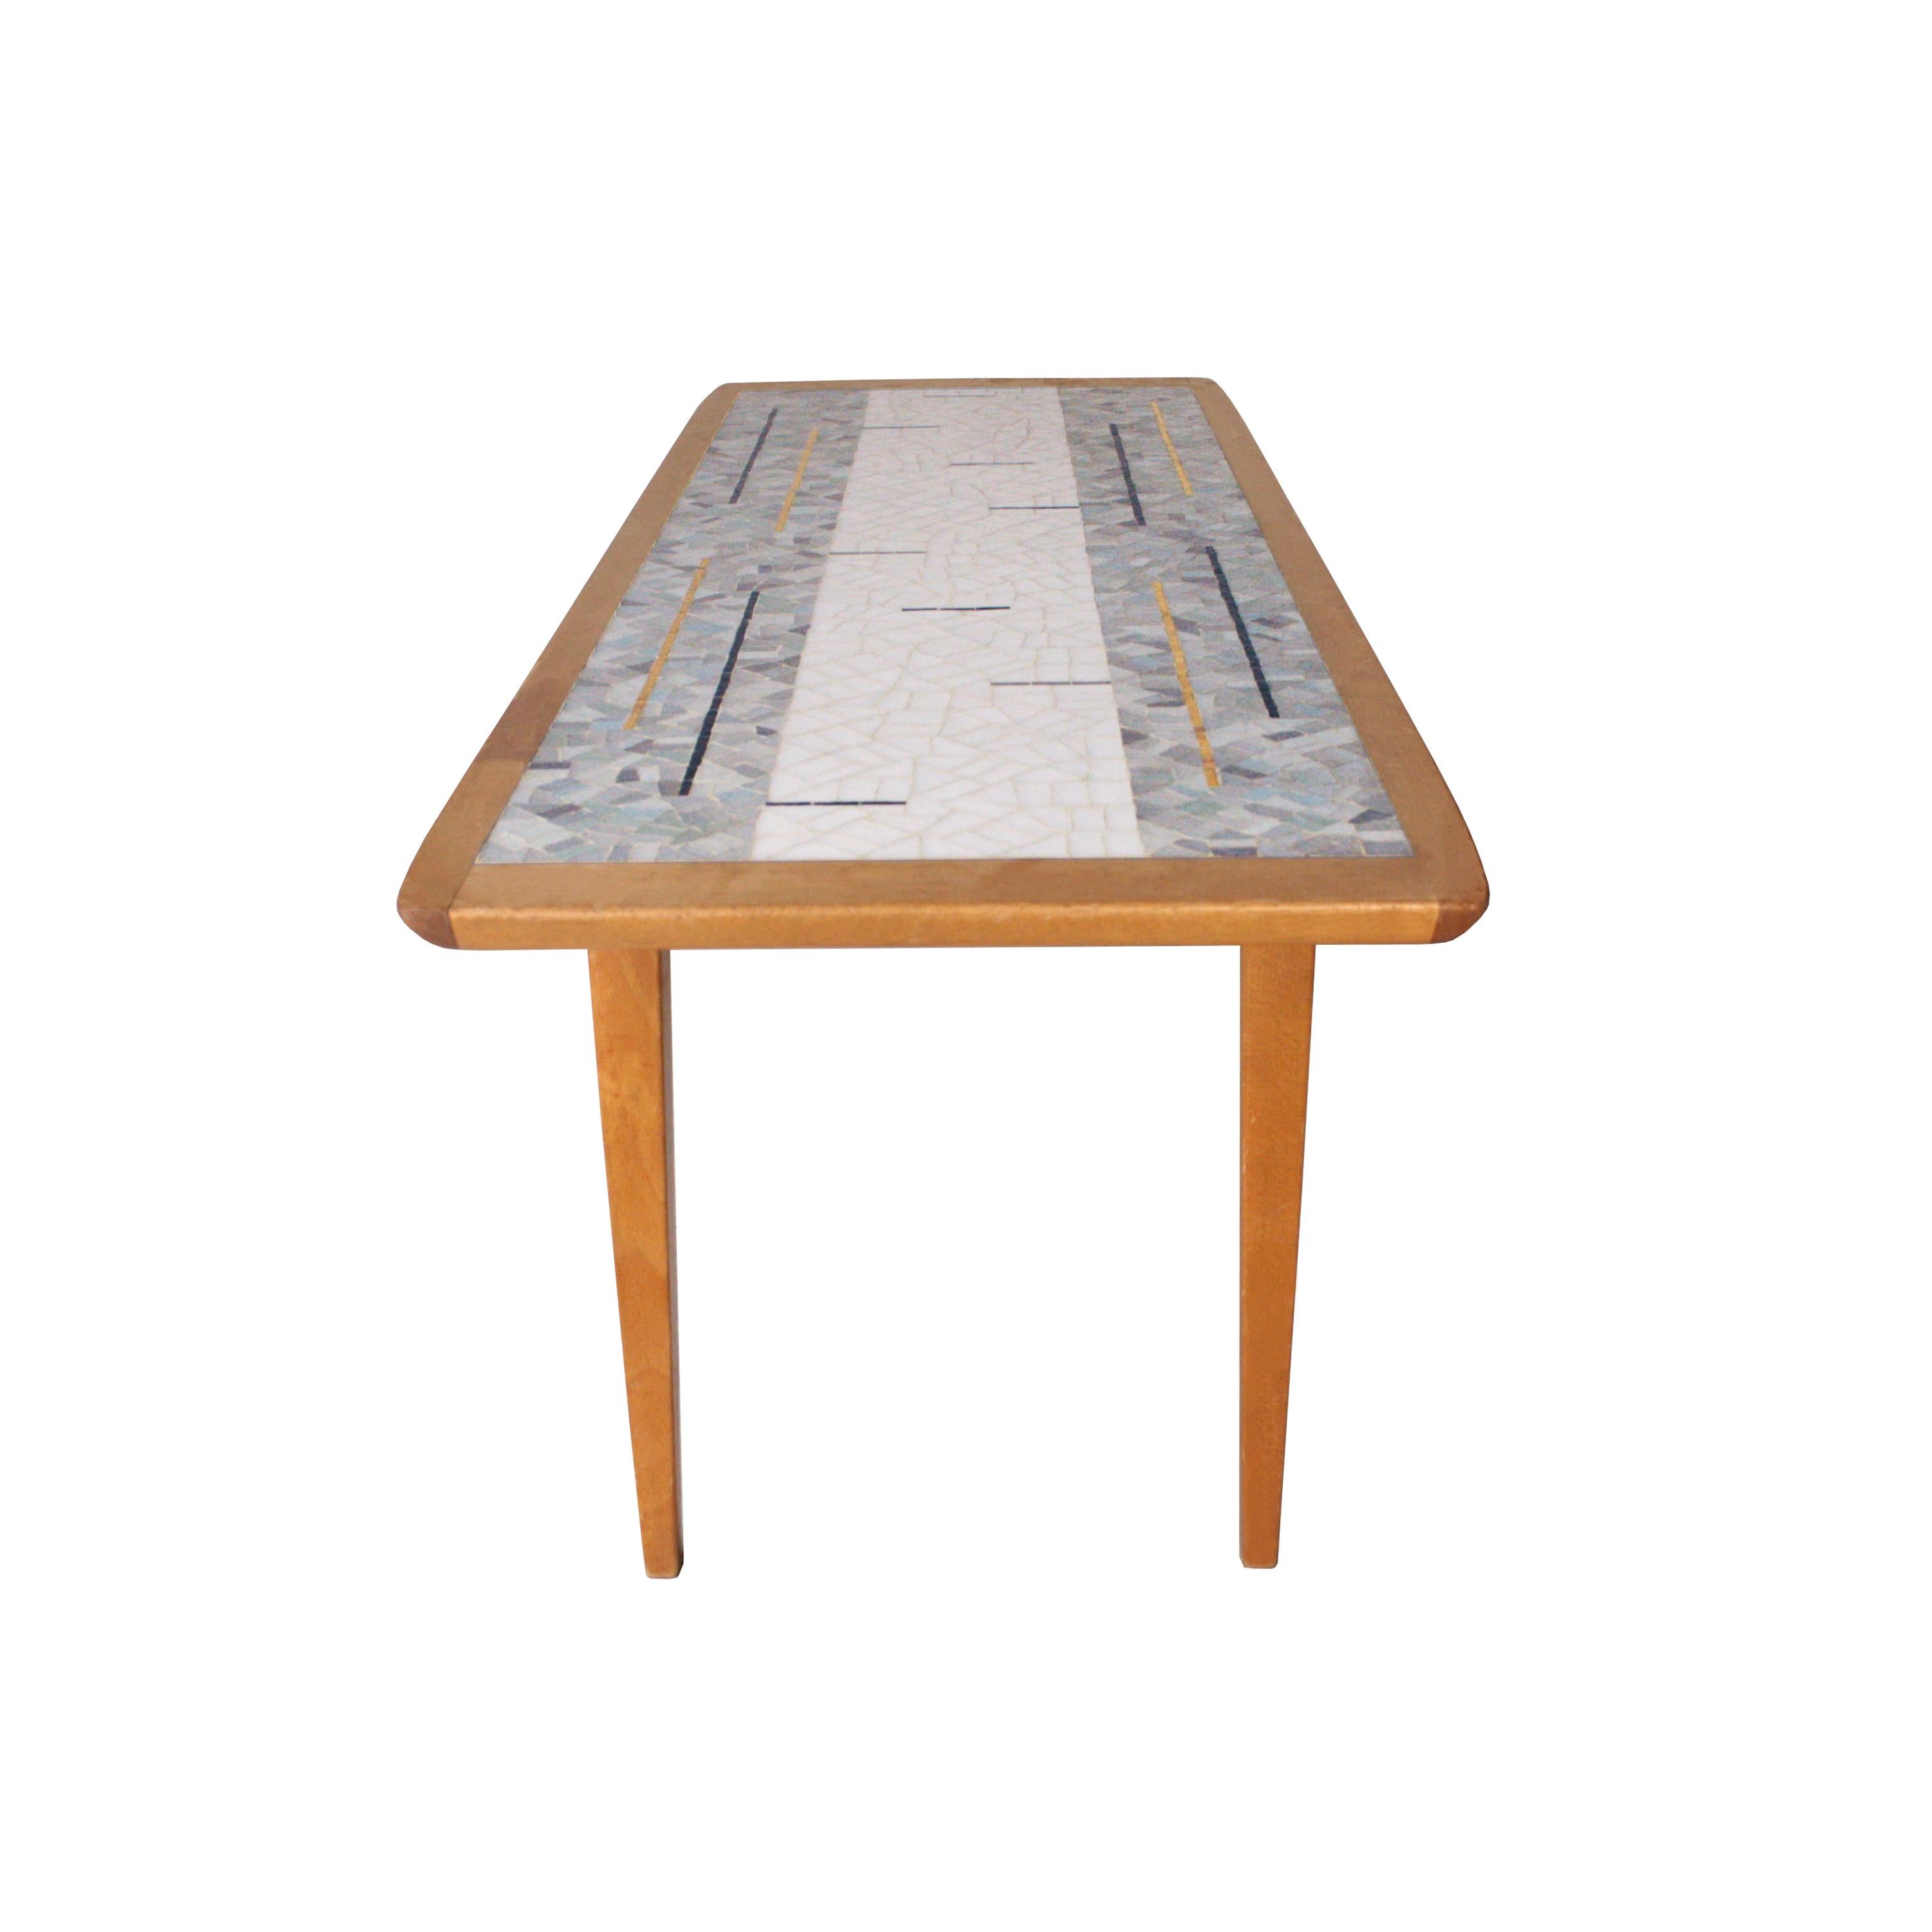 French Mid-Century Modern Center Table with Glass Tiles. France, 1960